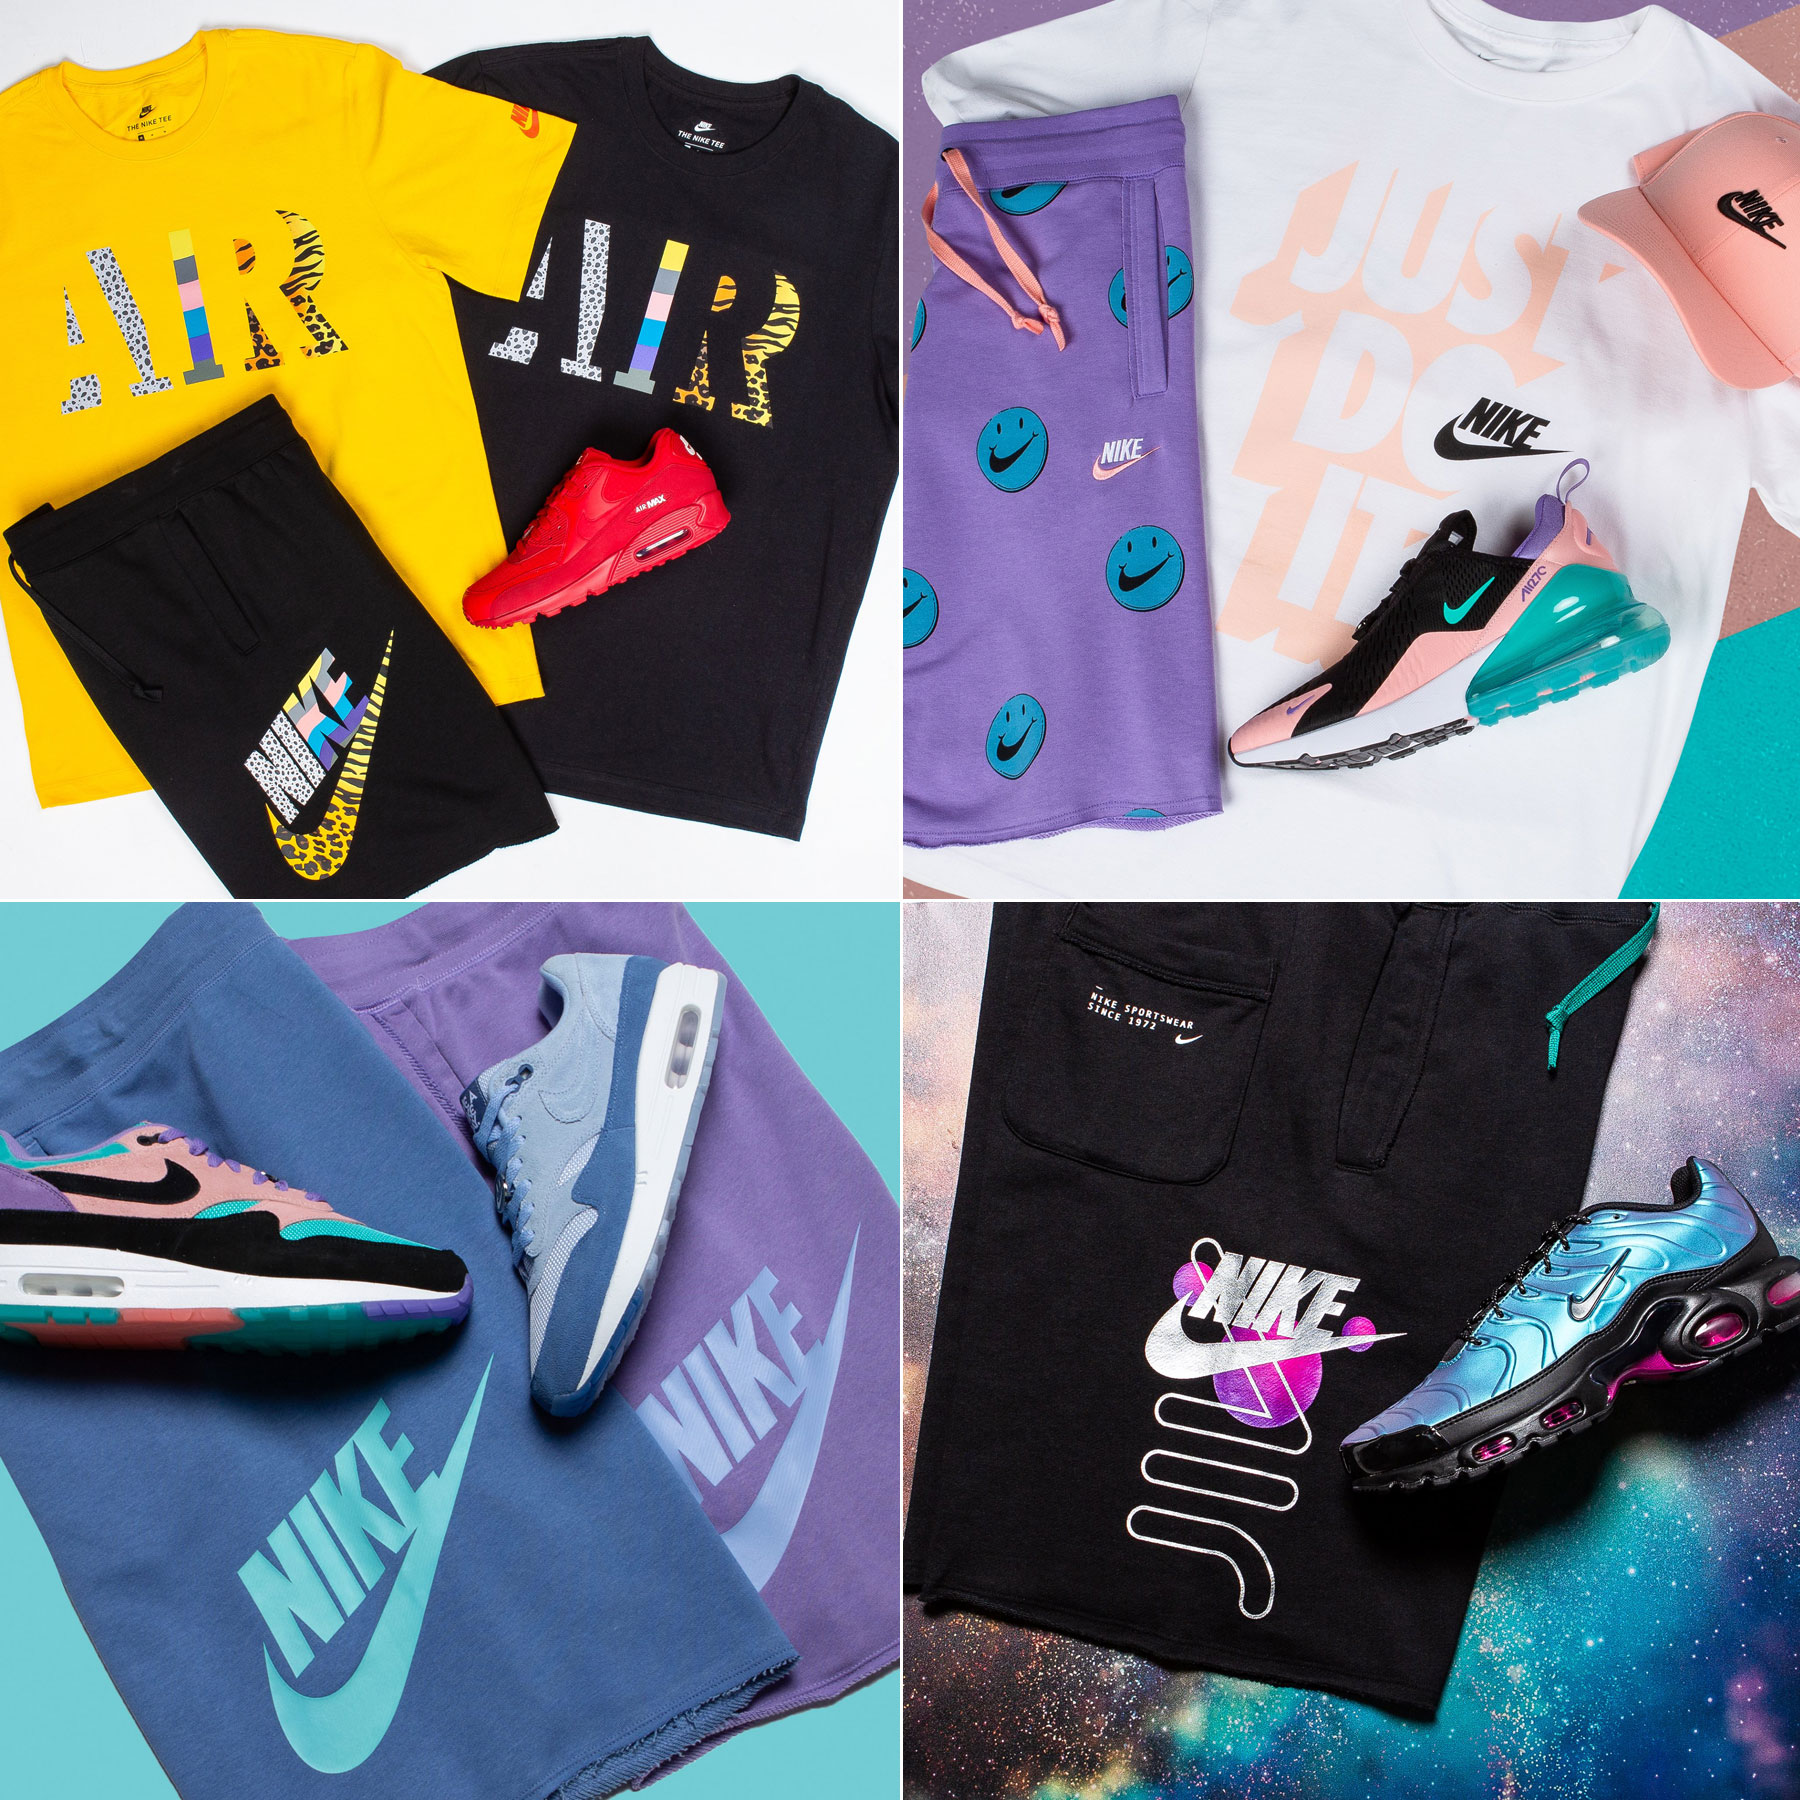 Nike Air Max Day 2019 Clothing and 